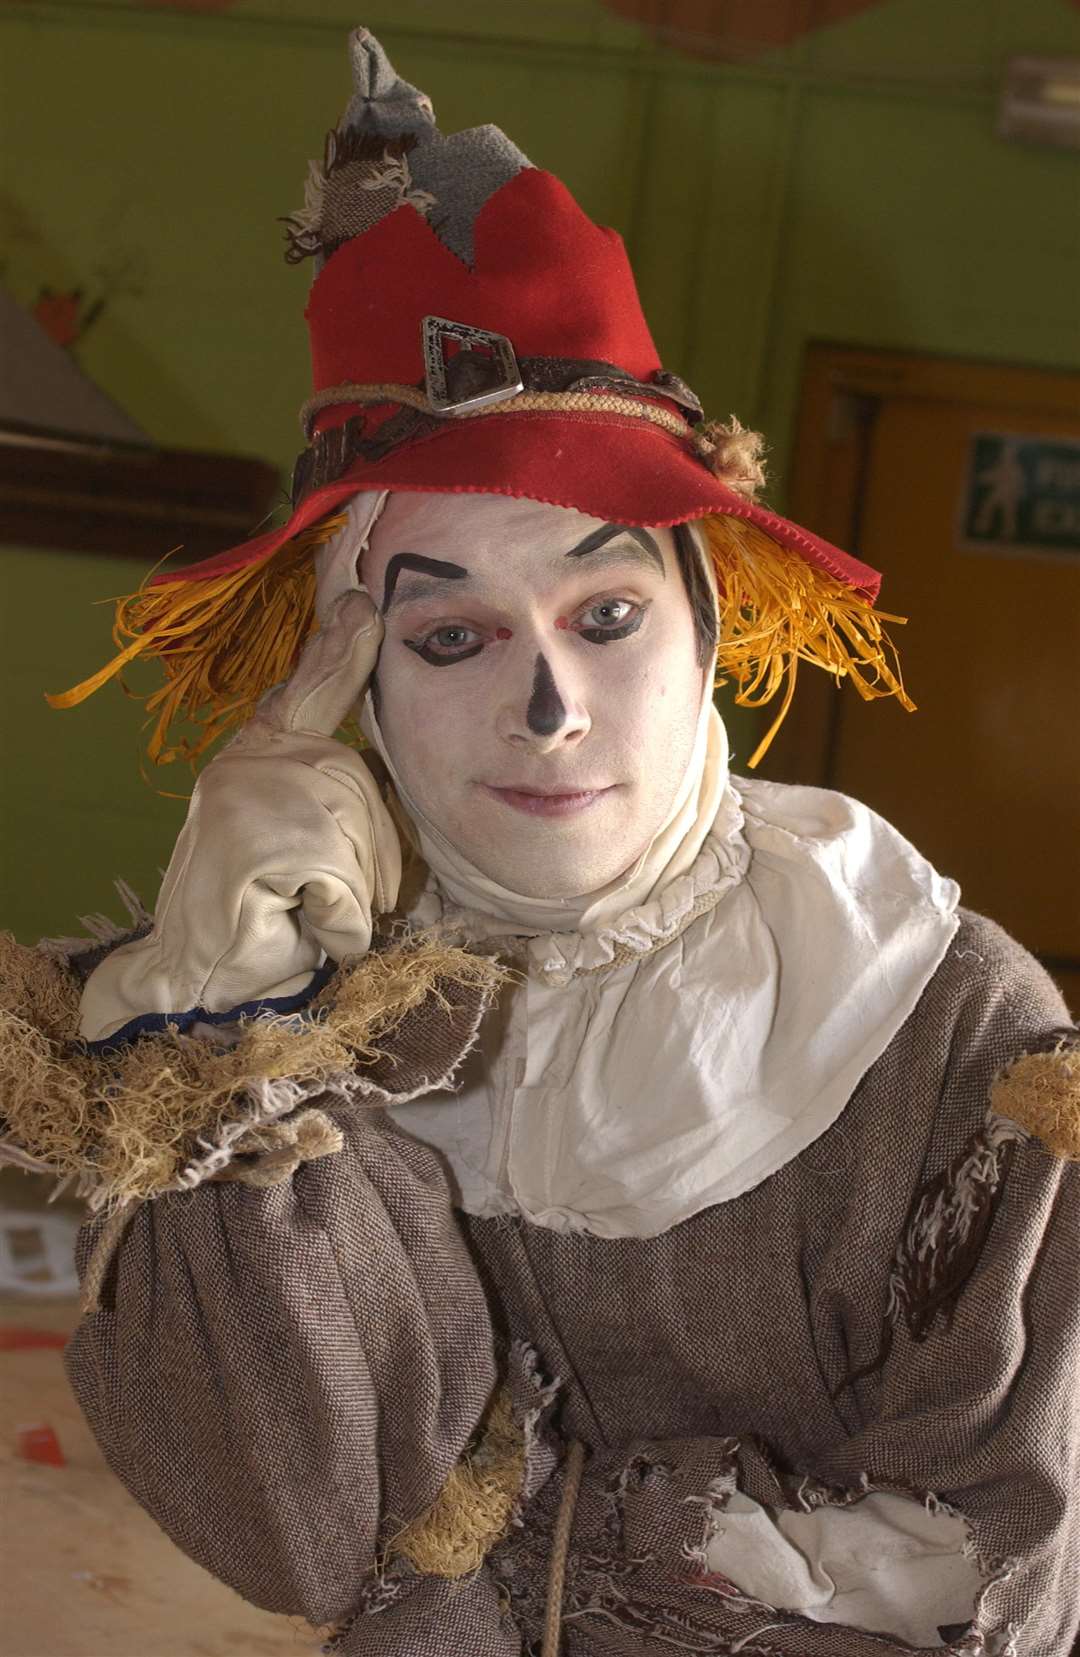 The late Boyzone star Stephen Gately was the scarecrow in Canterbury